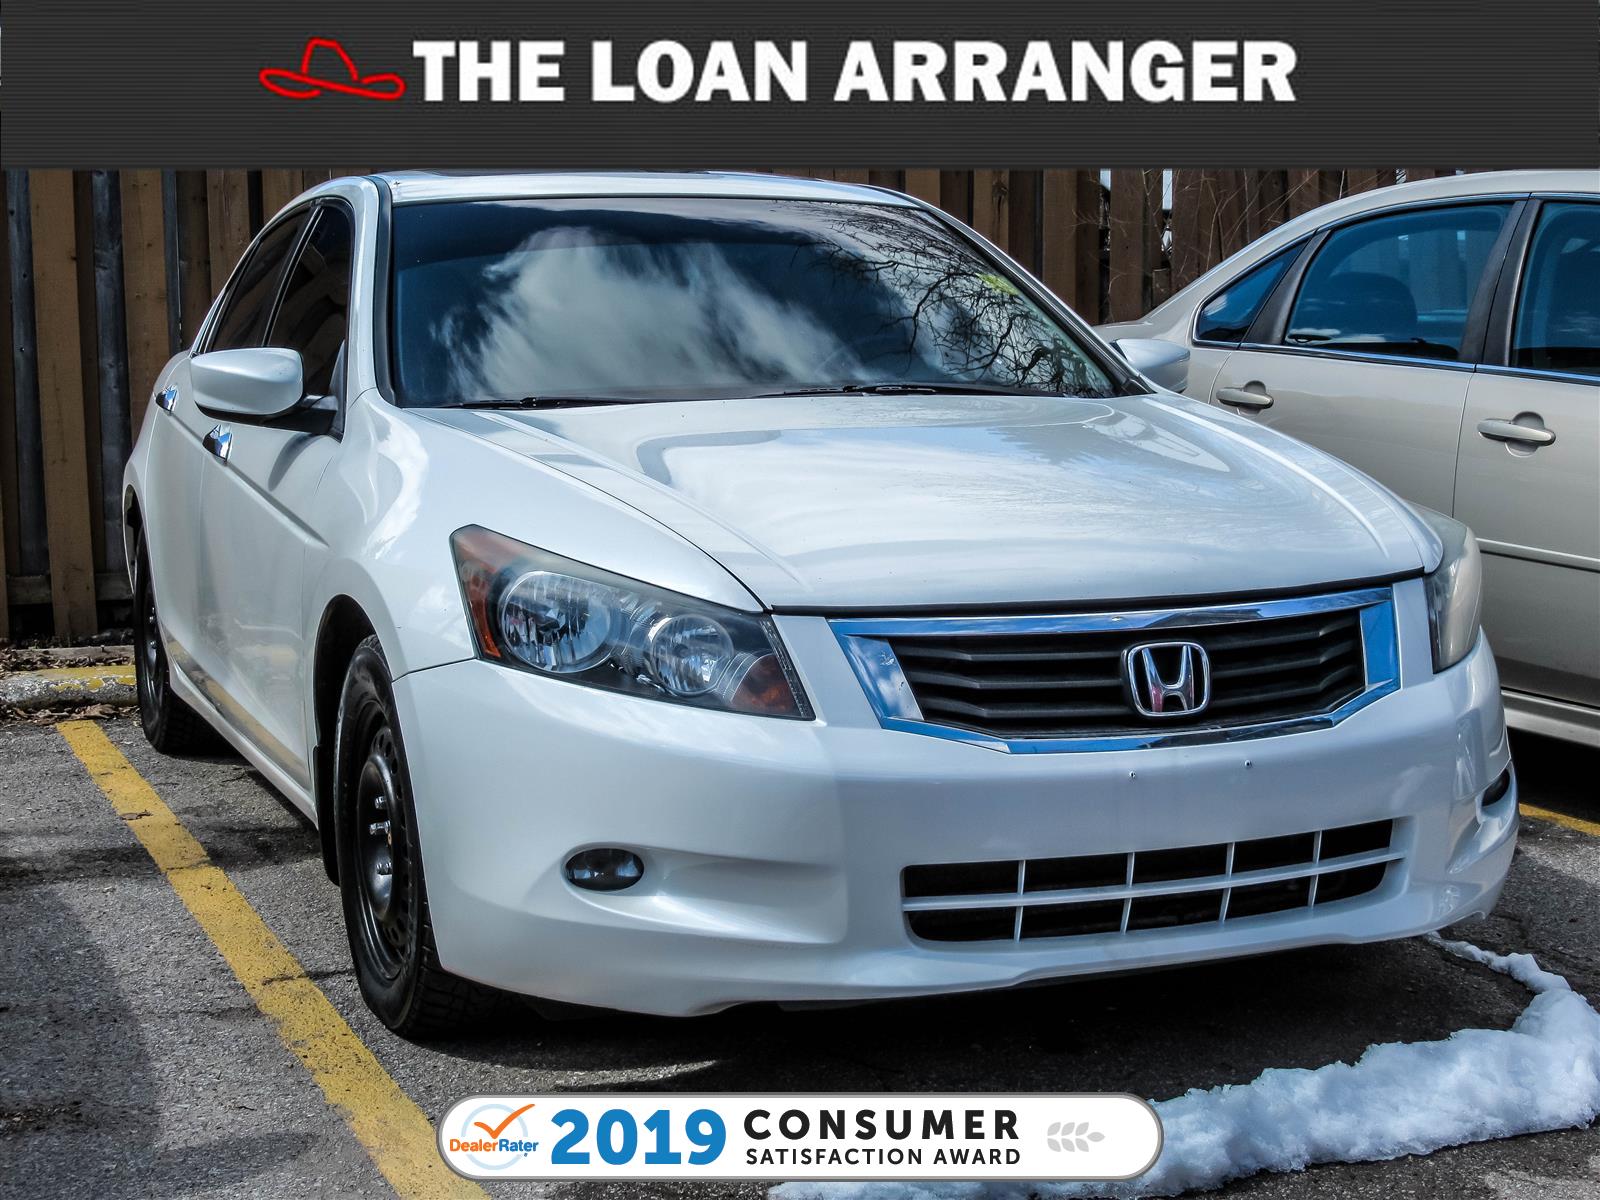 Used 2008 Honda Accord in Scarborough,ON